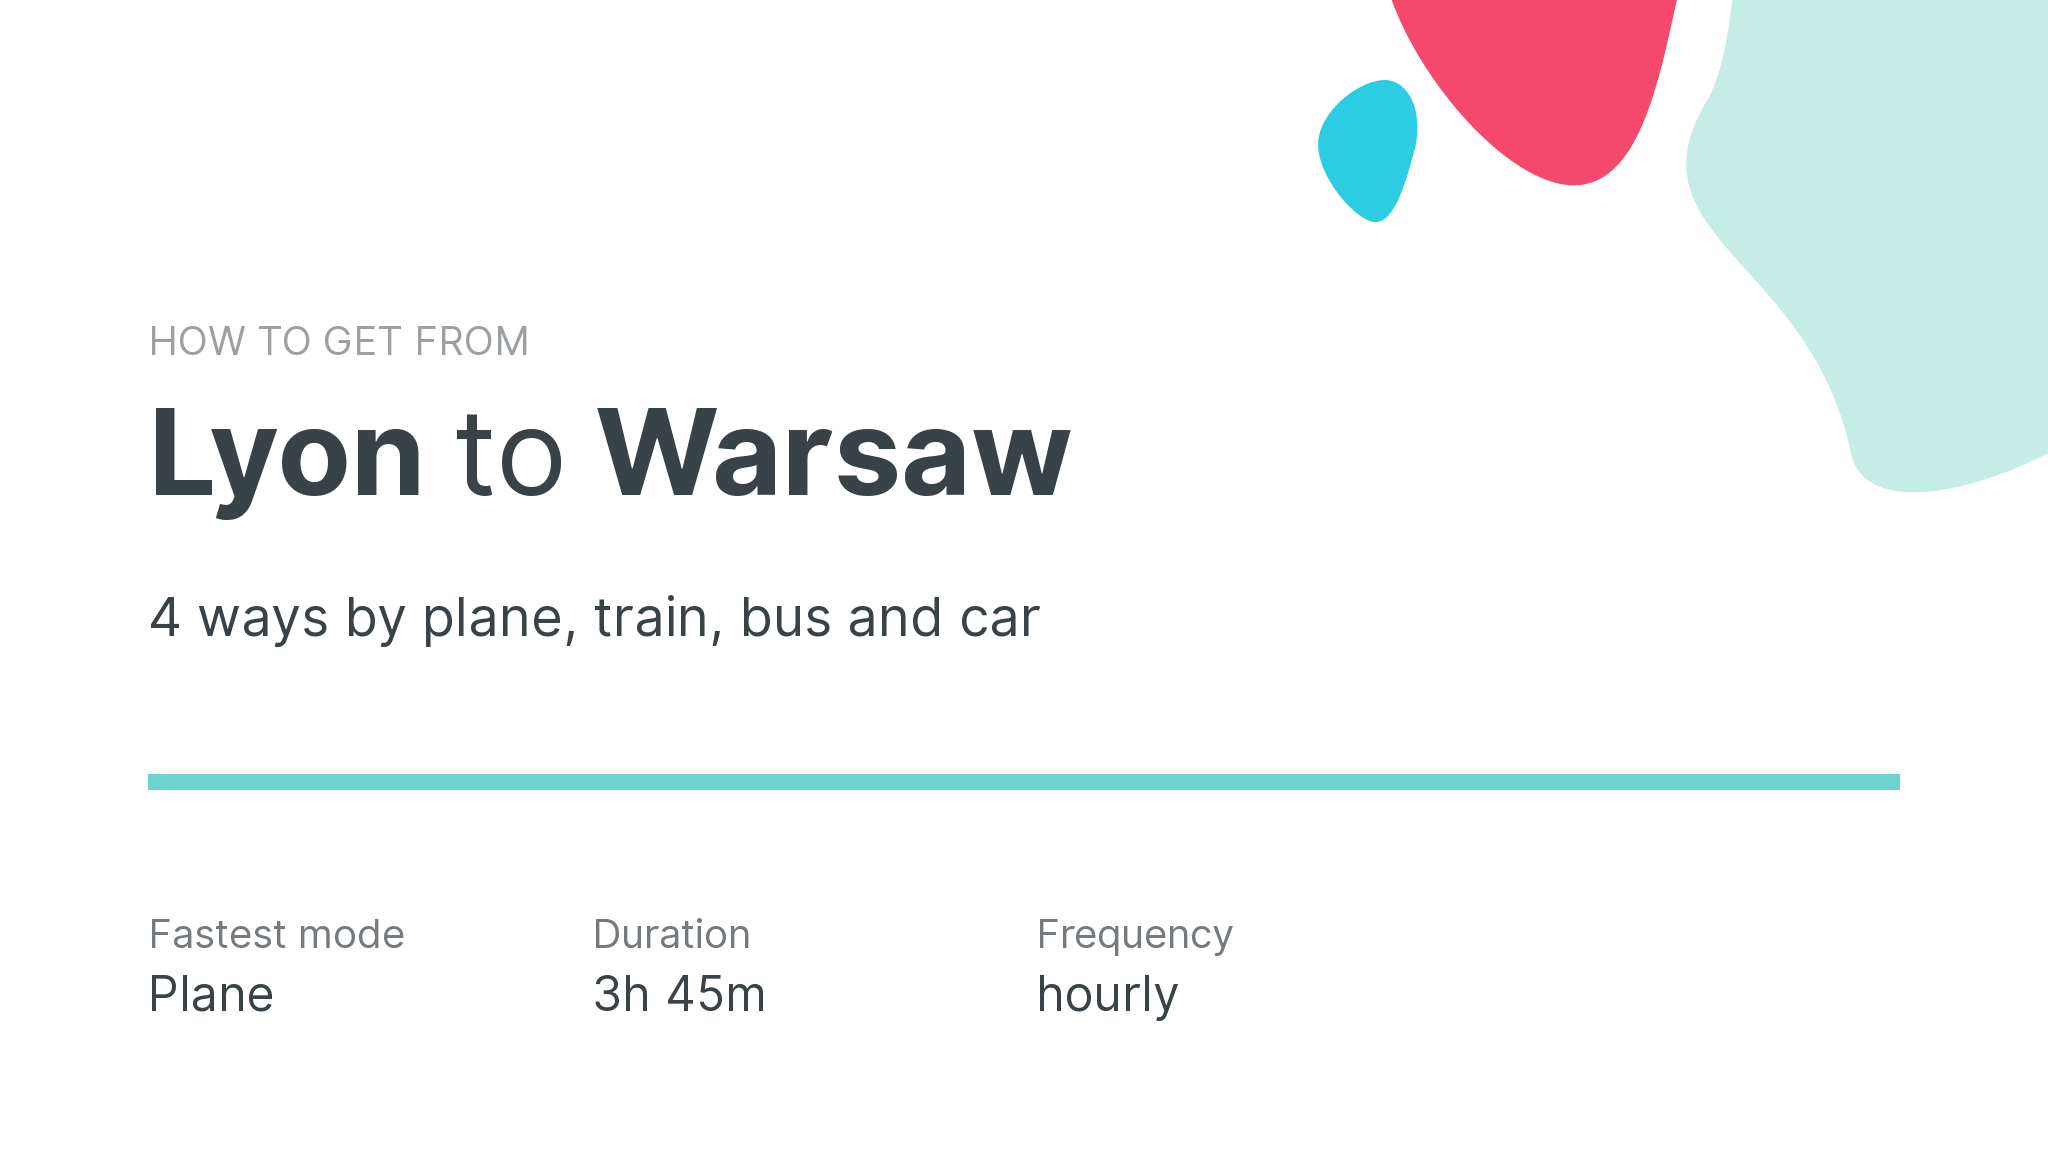 How do I get from Lyon to Warsaw